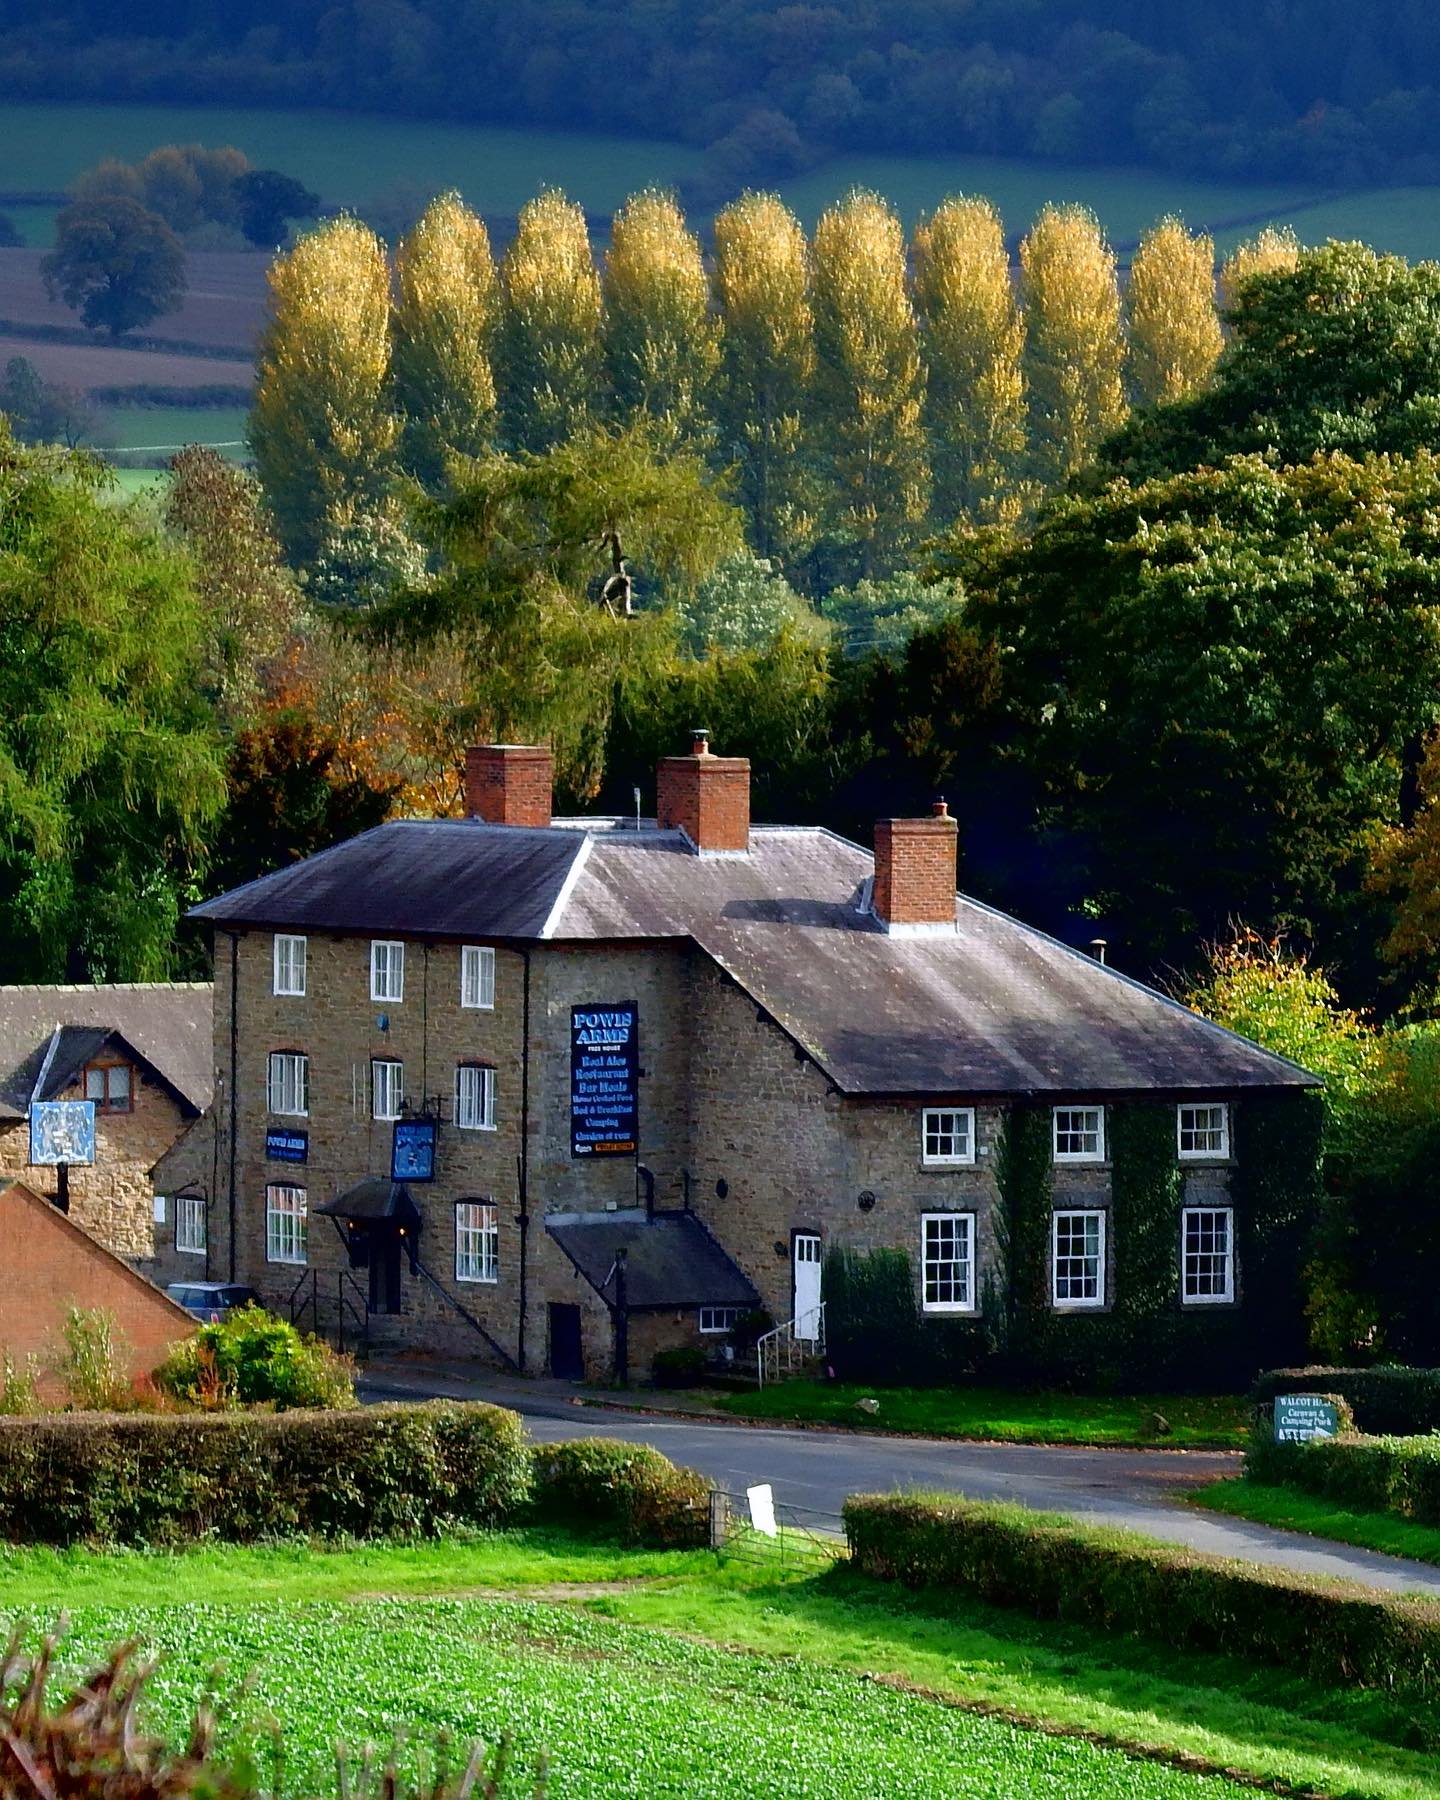 Stay and Dine with us at the @powisarms in the south Shropshire countryside 🌳🍻🛌 

The Powis Arms has four simple but comfortable bedrooms on the first floor of the pub. Three of the bedrooms have ensuite bathrooms and one has an ensuite shower ✨ 
